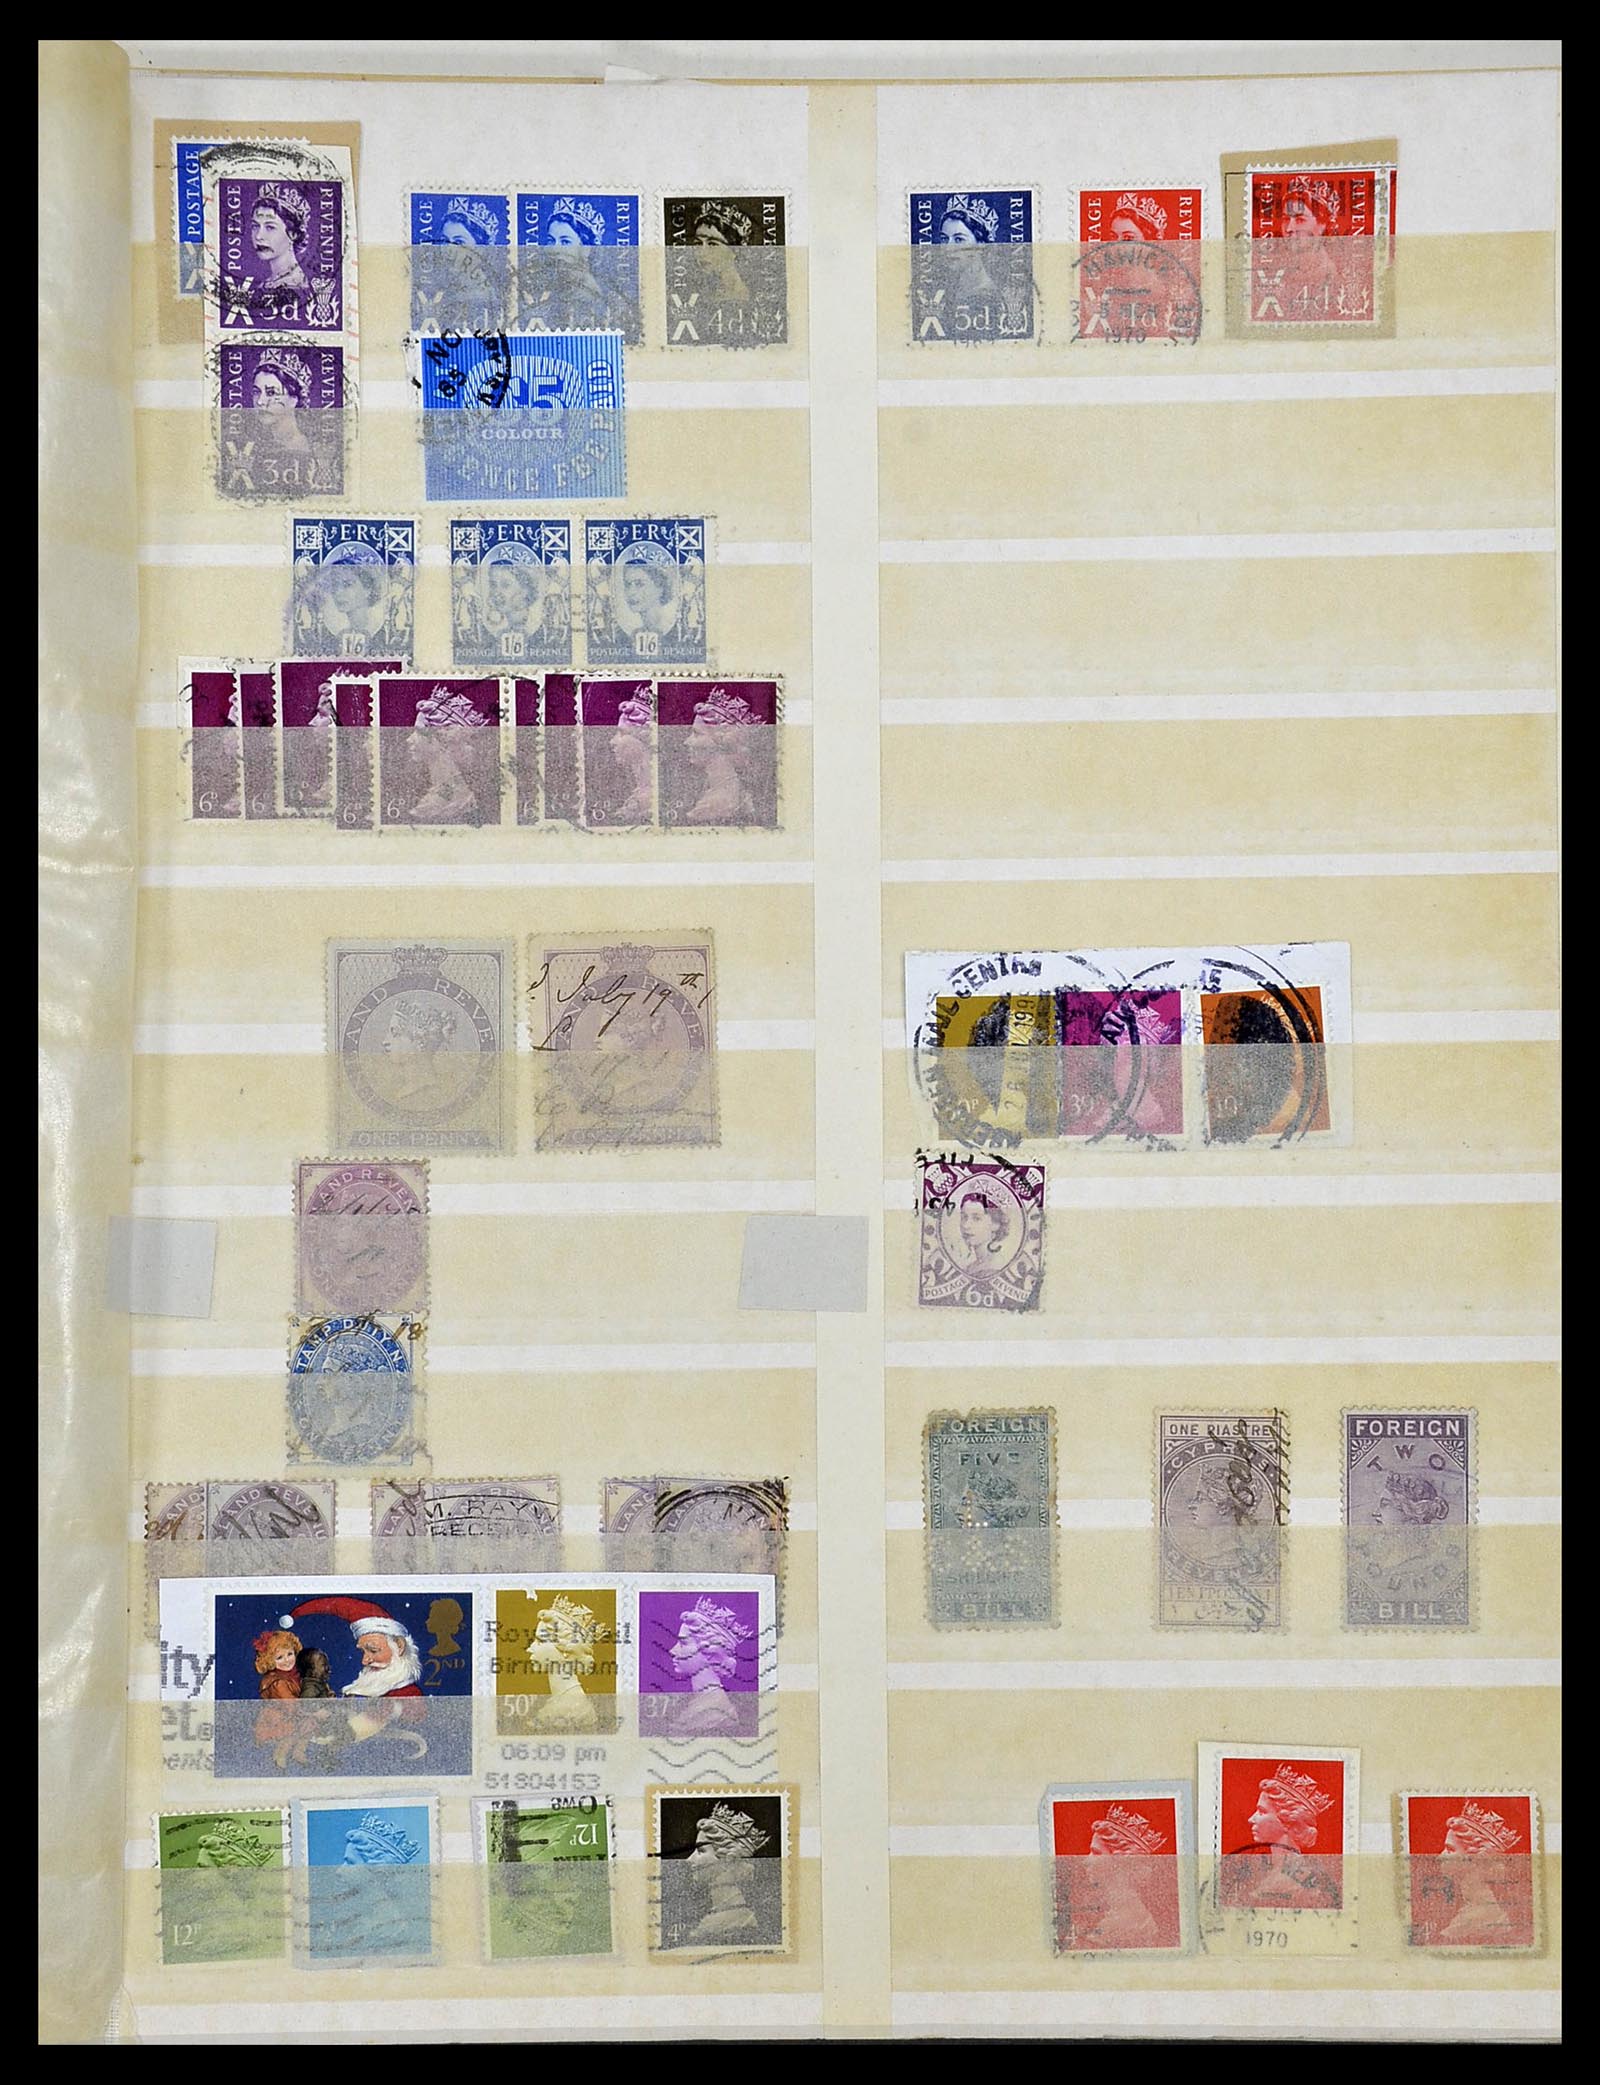 34221 074 - Stamp collection 34221 Great Britain Machins/castles 1971-2005.